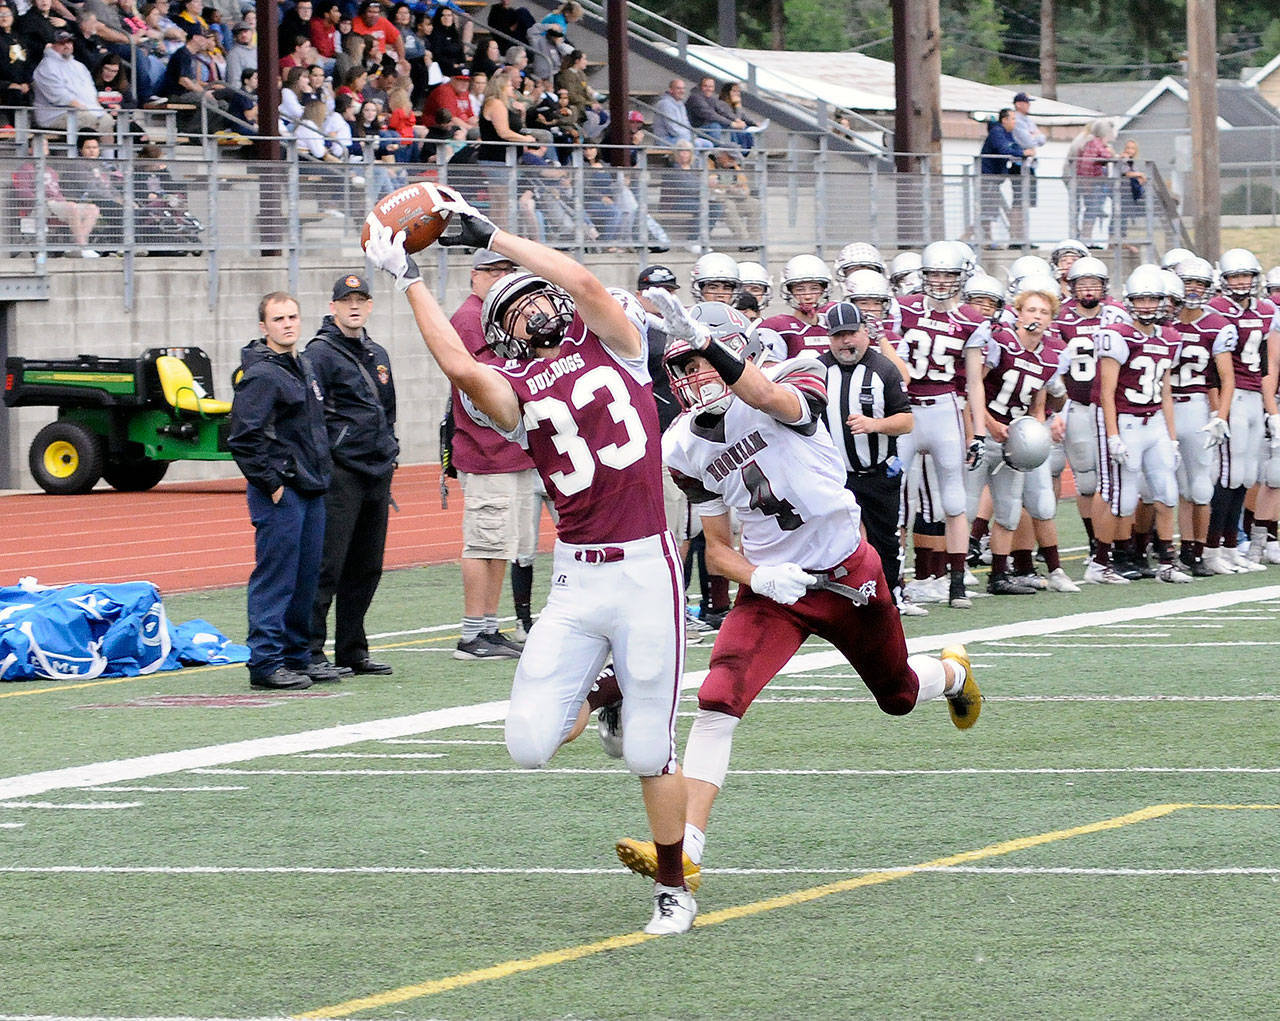 Montesano receiver Jordan King (33) catches a touchdown pass while being defended by Hoquiam’s Abraham Morales during the Jamboree at Jack Rottle Field on Friday. (Hasani Grayson | Grays Harbor News Group)